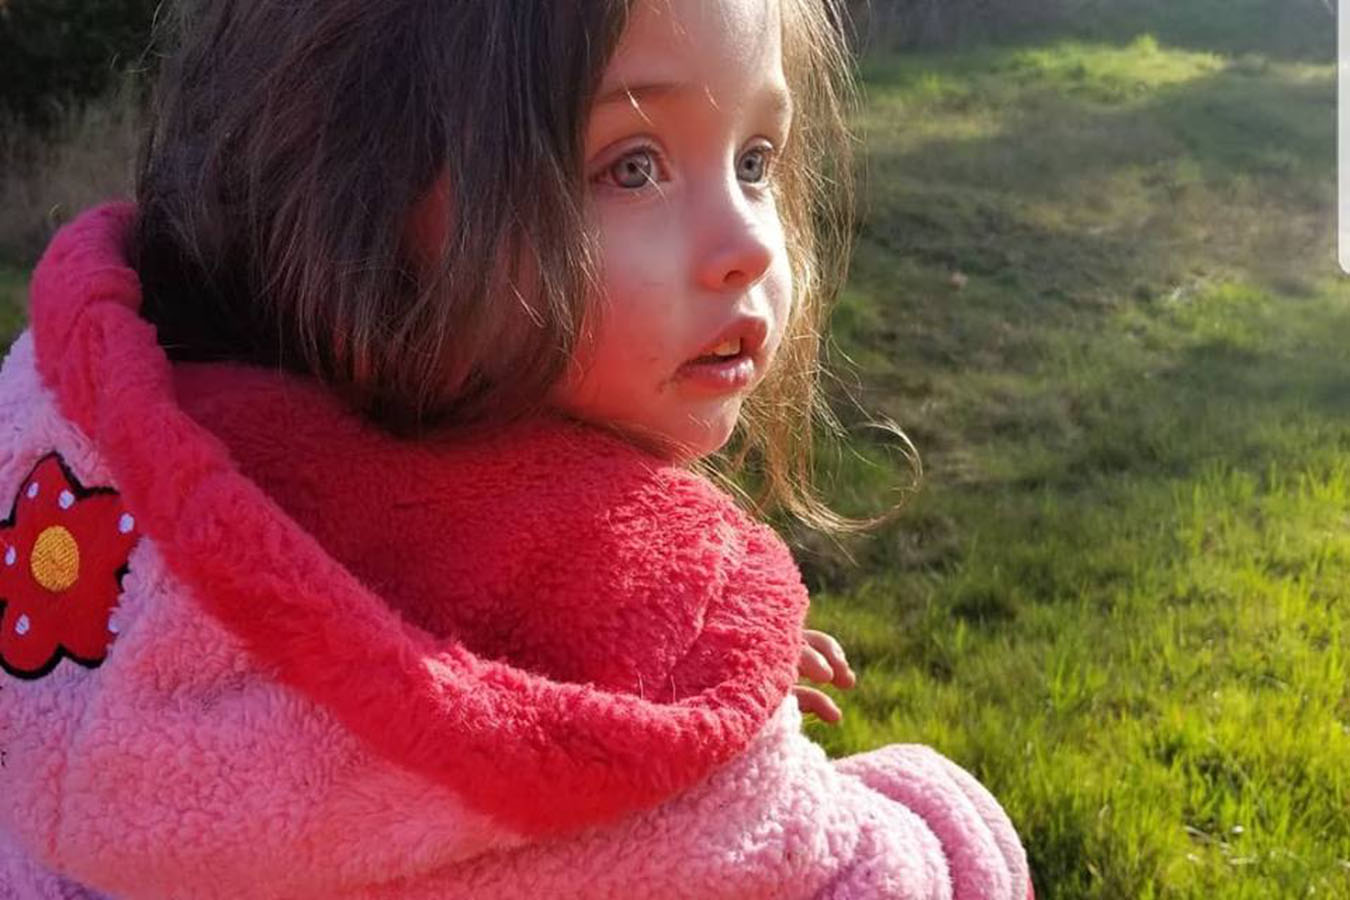 Young girl with long brown hair and a pink fleece jacket stares off to the right while the sun shines on her face